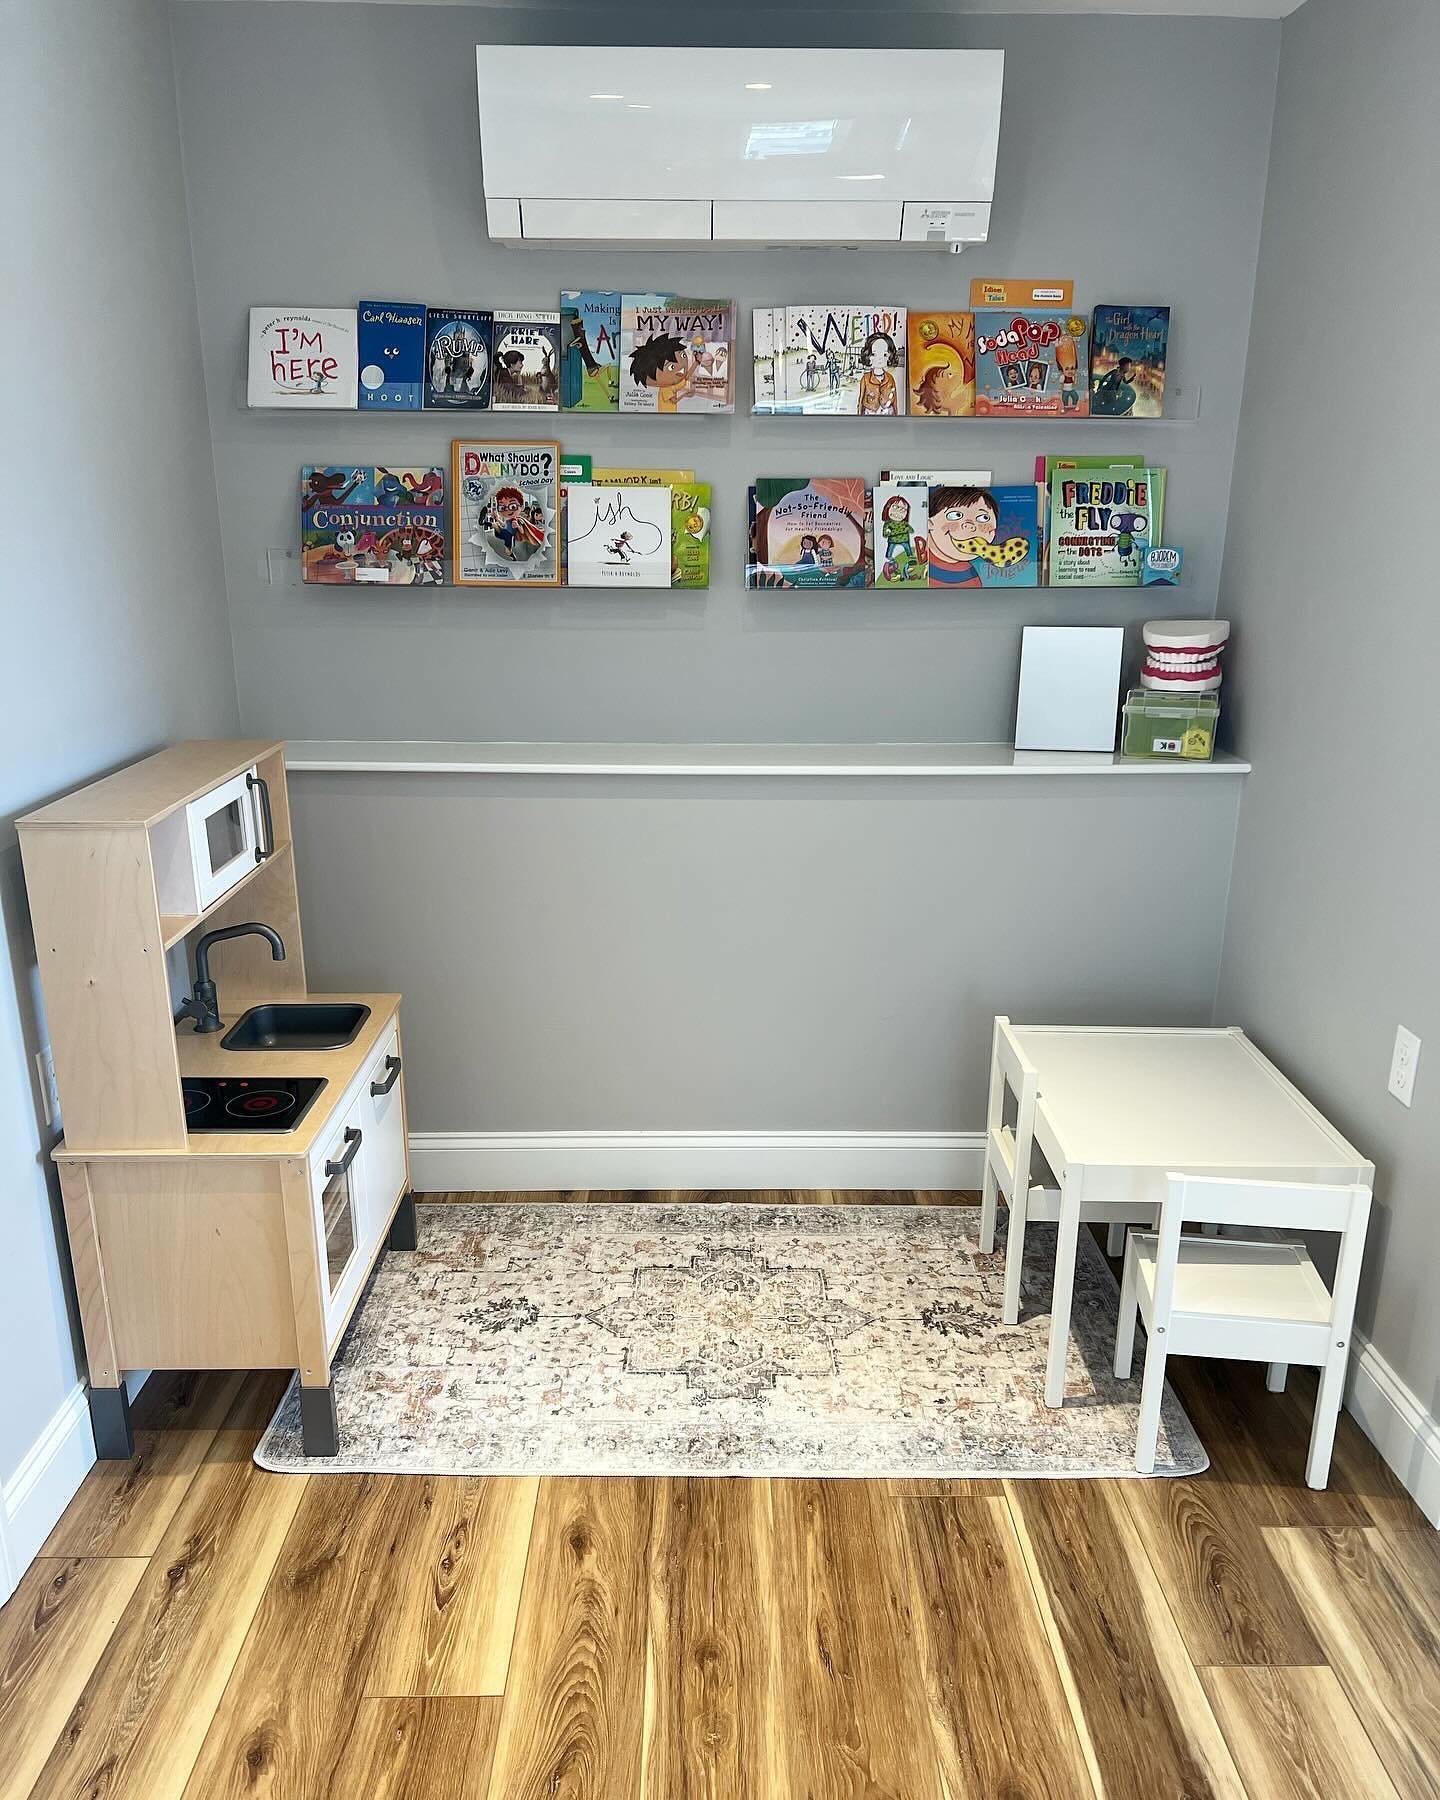 Now Enrolling Speech Therapy &amp; Reading Intervention! 

You can visit the website at www.creatingcommunicators.com or email tanya@creatingcommunicators.com for more information! 

#speechtherapy #slp #readingintervention #ortongillingham #structur